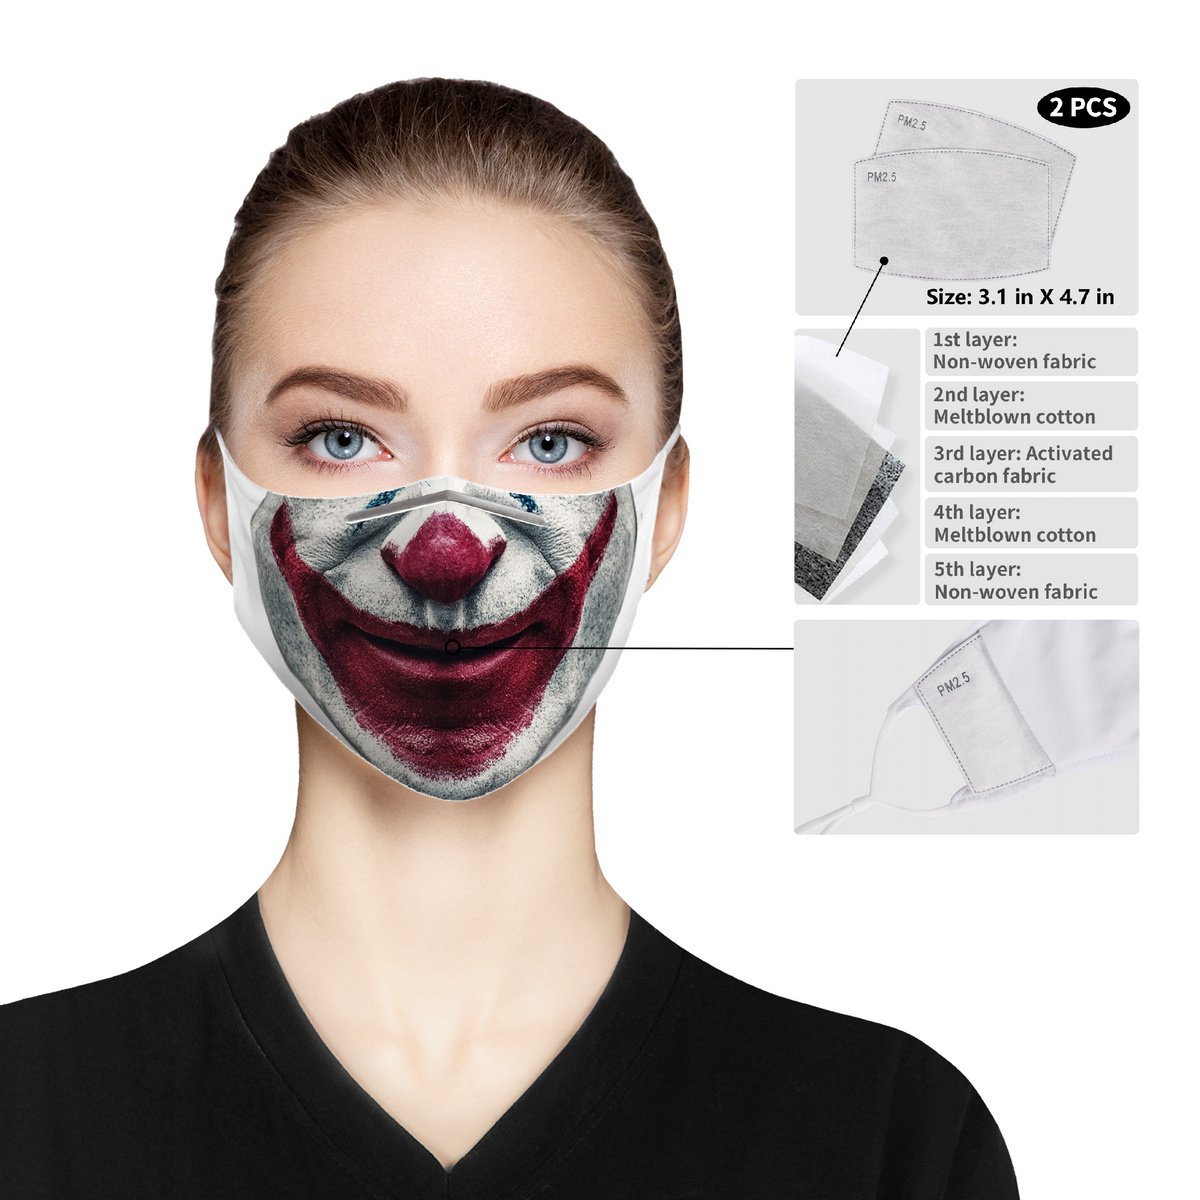 Pads The 2x 50x - Joker Five Face Mask Layer Filter | Avail Disposable